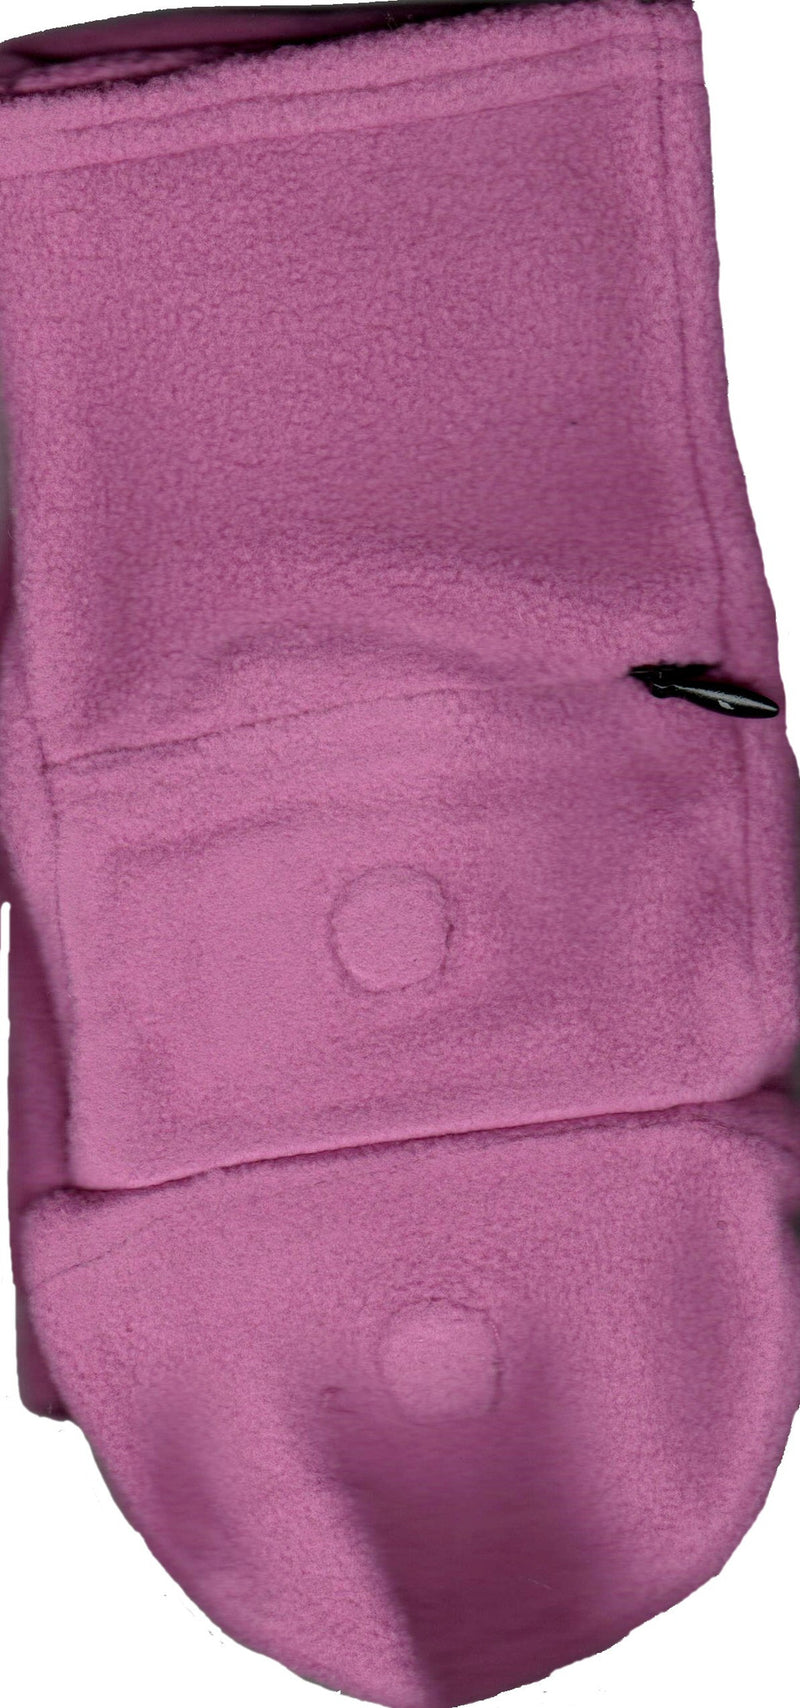 Lauer Fingerless Gloves with Cap in Mauve has 2 Zippered Pockets for items like cash, keys and ID. The Magnet is the best Idea to hold the Cap from getting in the way when not in use.